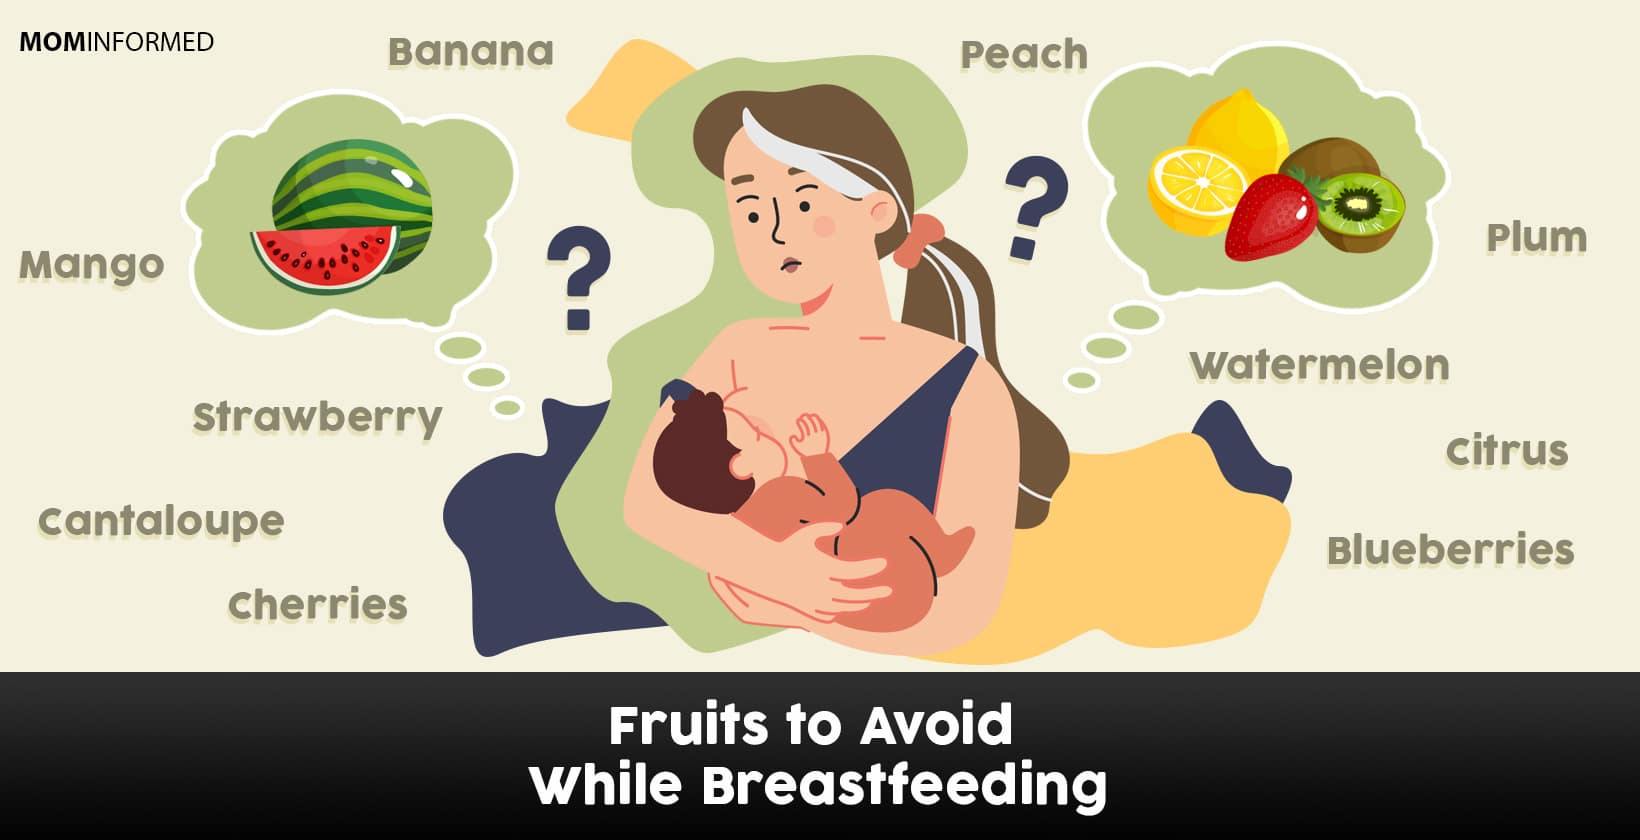 Fruits to avoid while breastfeeding